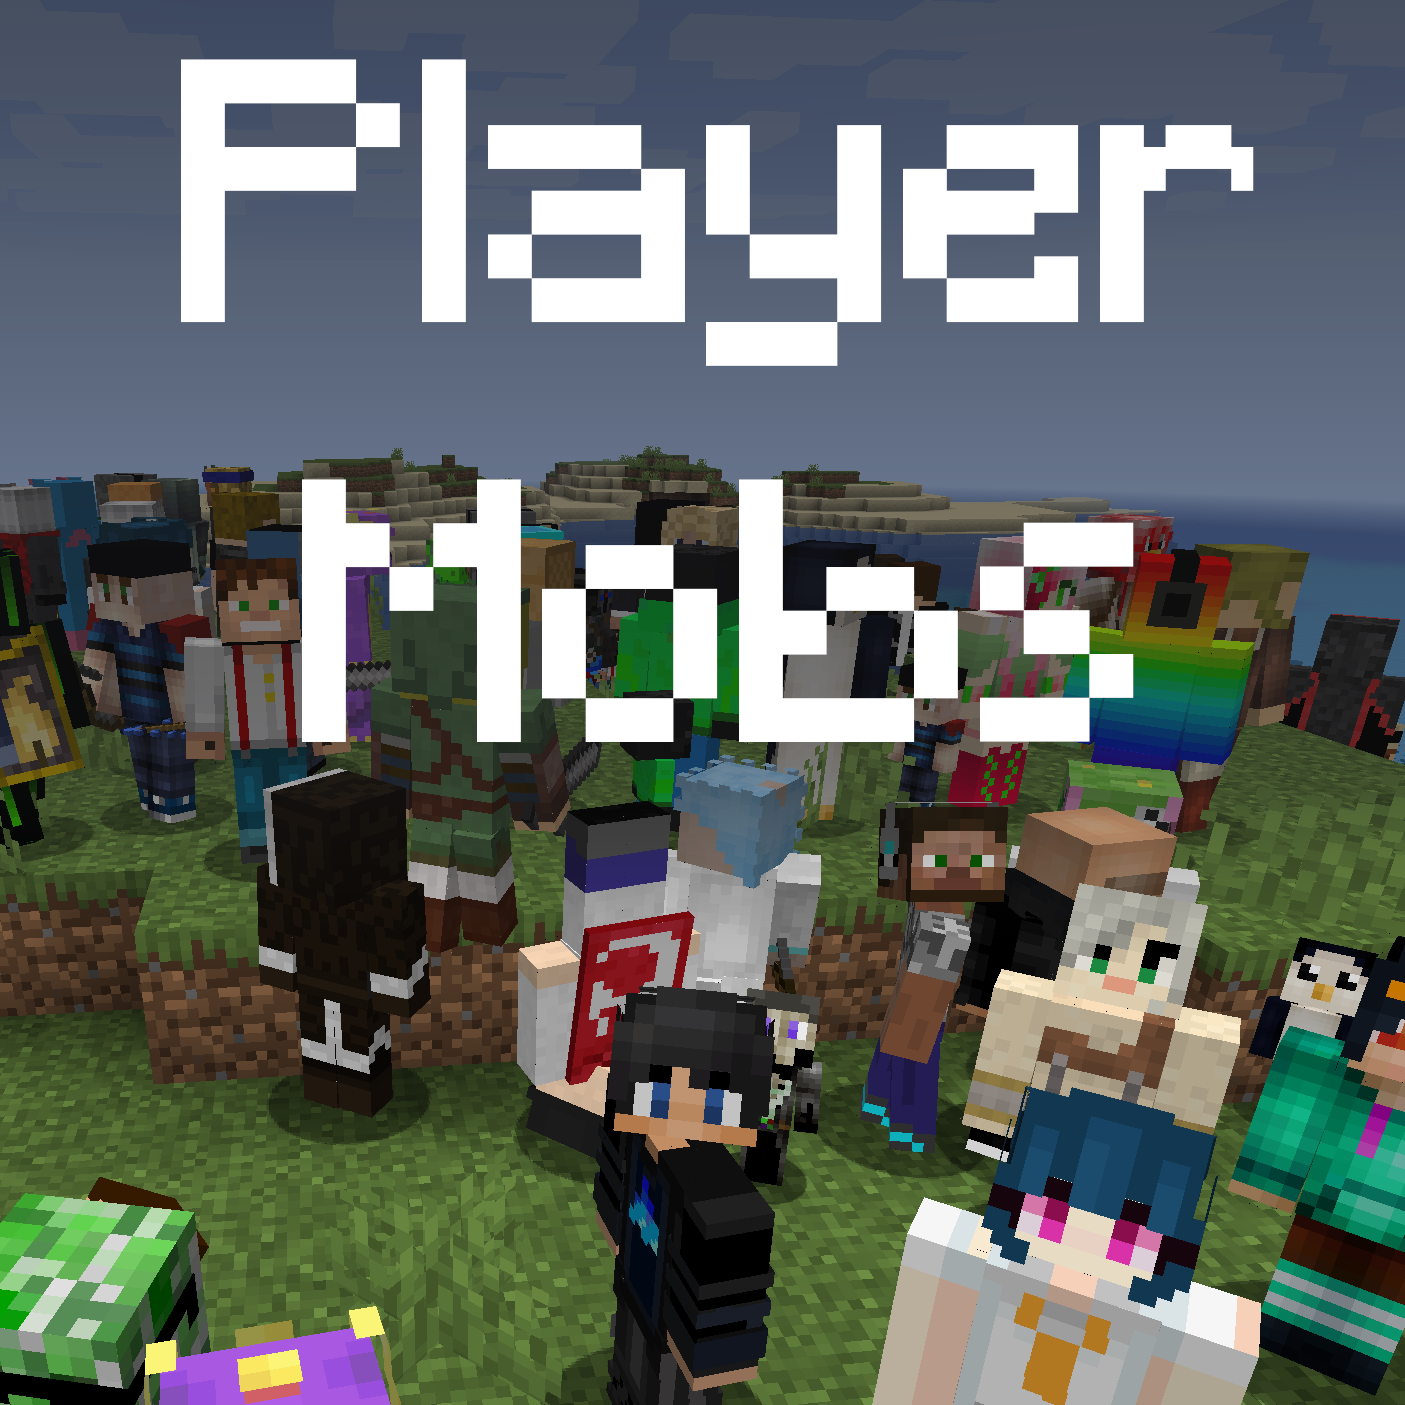 Two Players Minigames - Minecraft Worlds - CurseForge